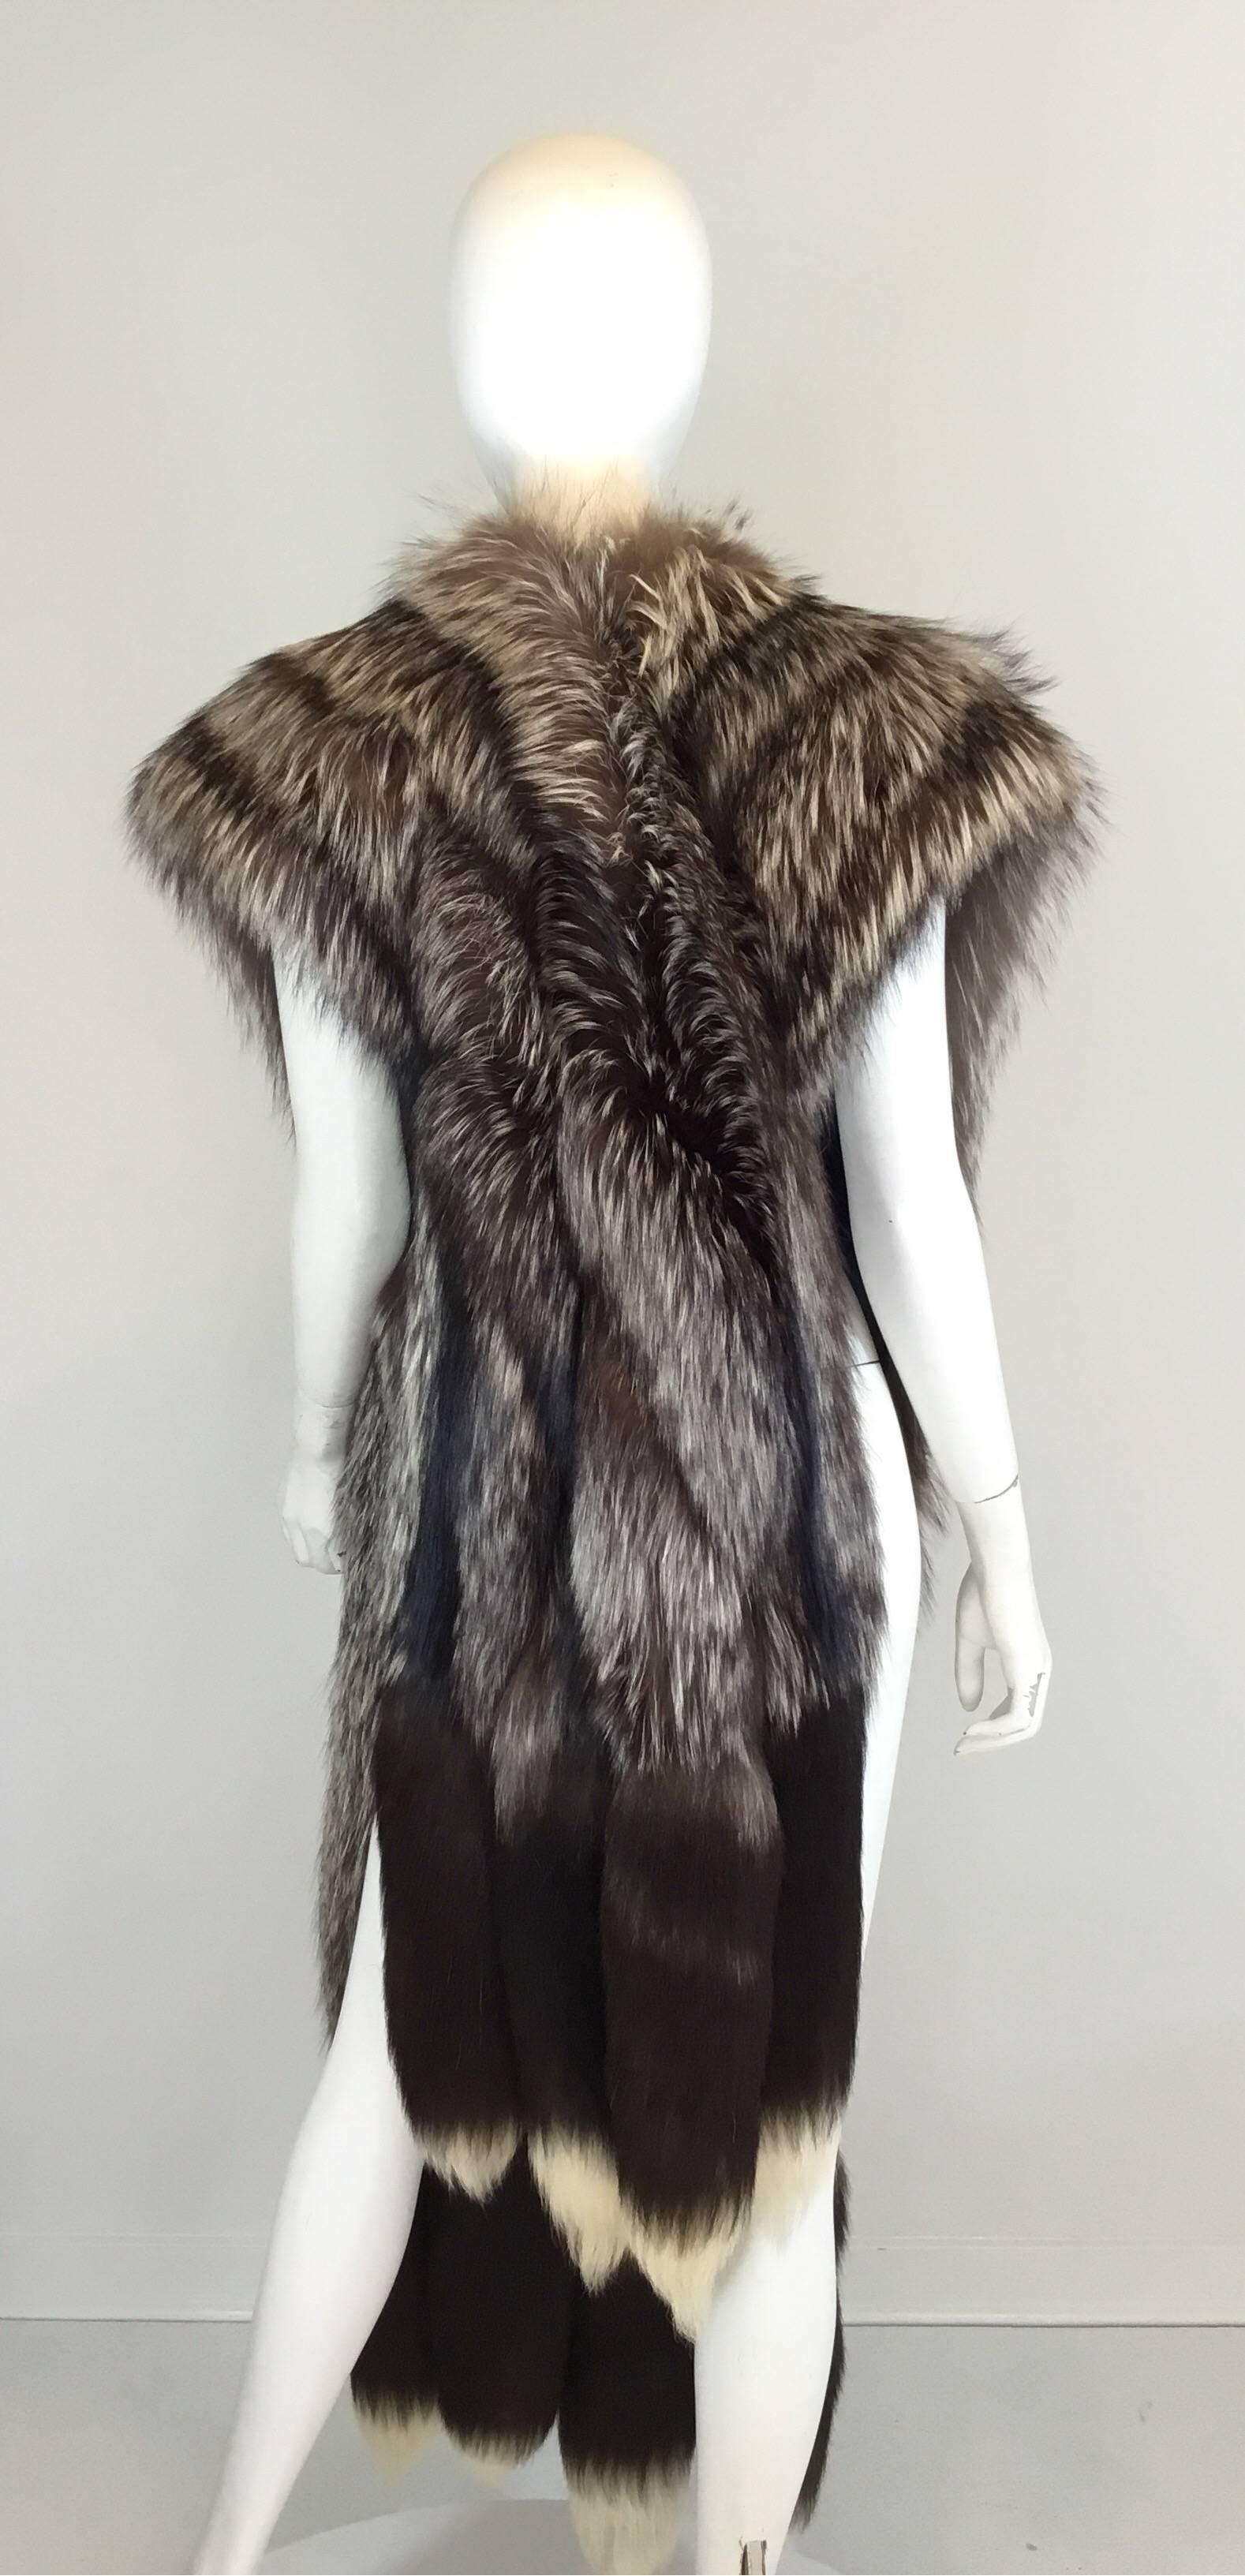 Silvertip fox fur shawl with clip-on tails. Labeled Grosvenor. Vintage and glamorous. Fur is in good condition, no flaws to mention. Length 40'' (without clip on tails), 46'' (with clip on tails)